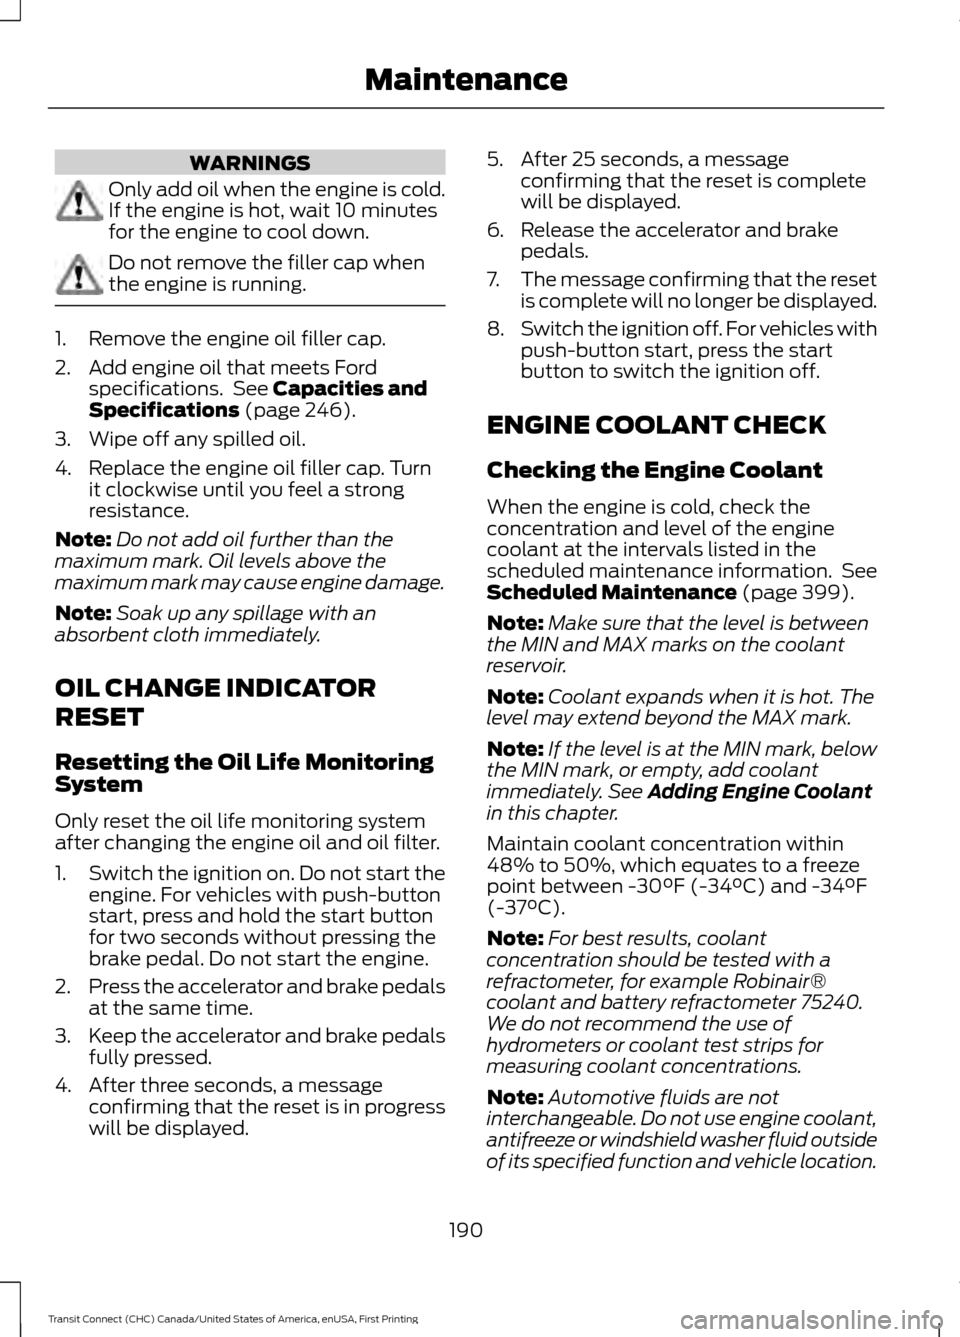 FORD TRANSIT CONNECT 2015 2.G Owners Manual WARNINGS
Only add oil when the engine is cold.
If the engine is hot, wait 10 minutes
for the engine to cool down.
Do not remove the filler cap when
the engine is running.
1. Remove the engine oil fill